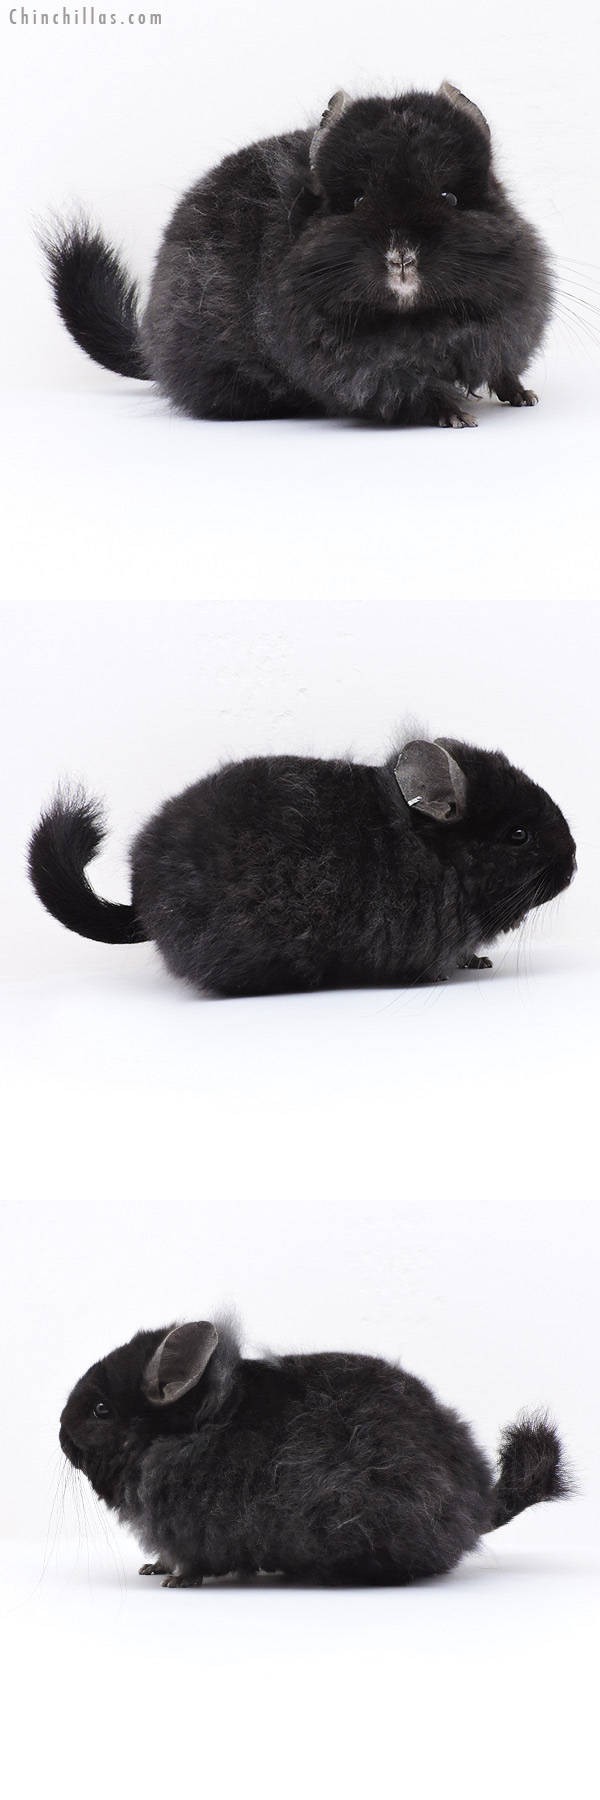 Chinchilla or related item offered for sale or export on Chinchillas.com - 19125 Exceptional Brevi Type  Royal Imperial Angora Female Chinchilla